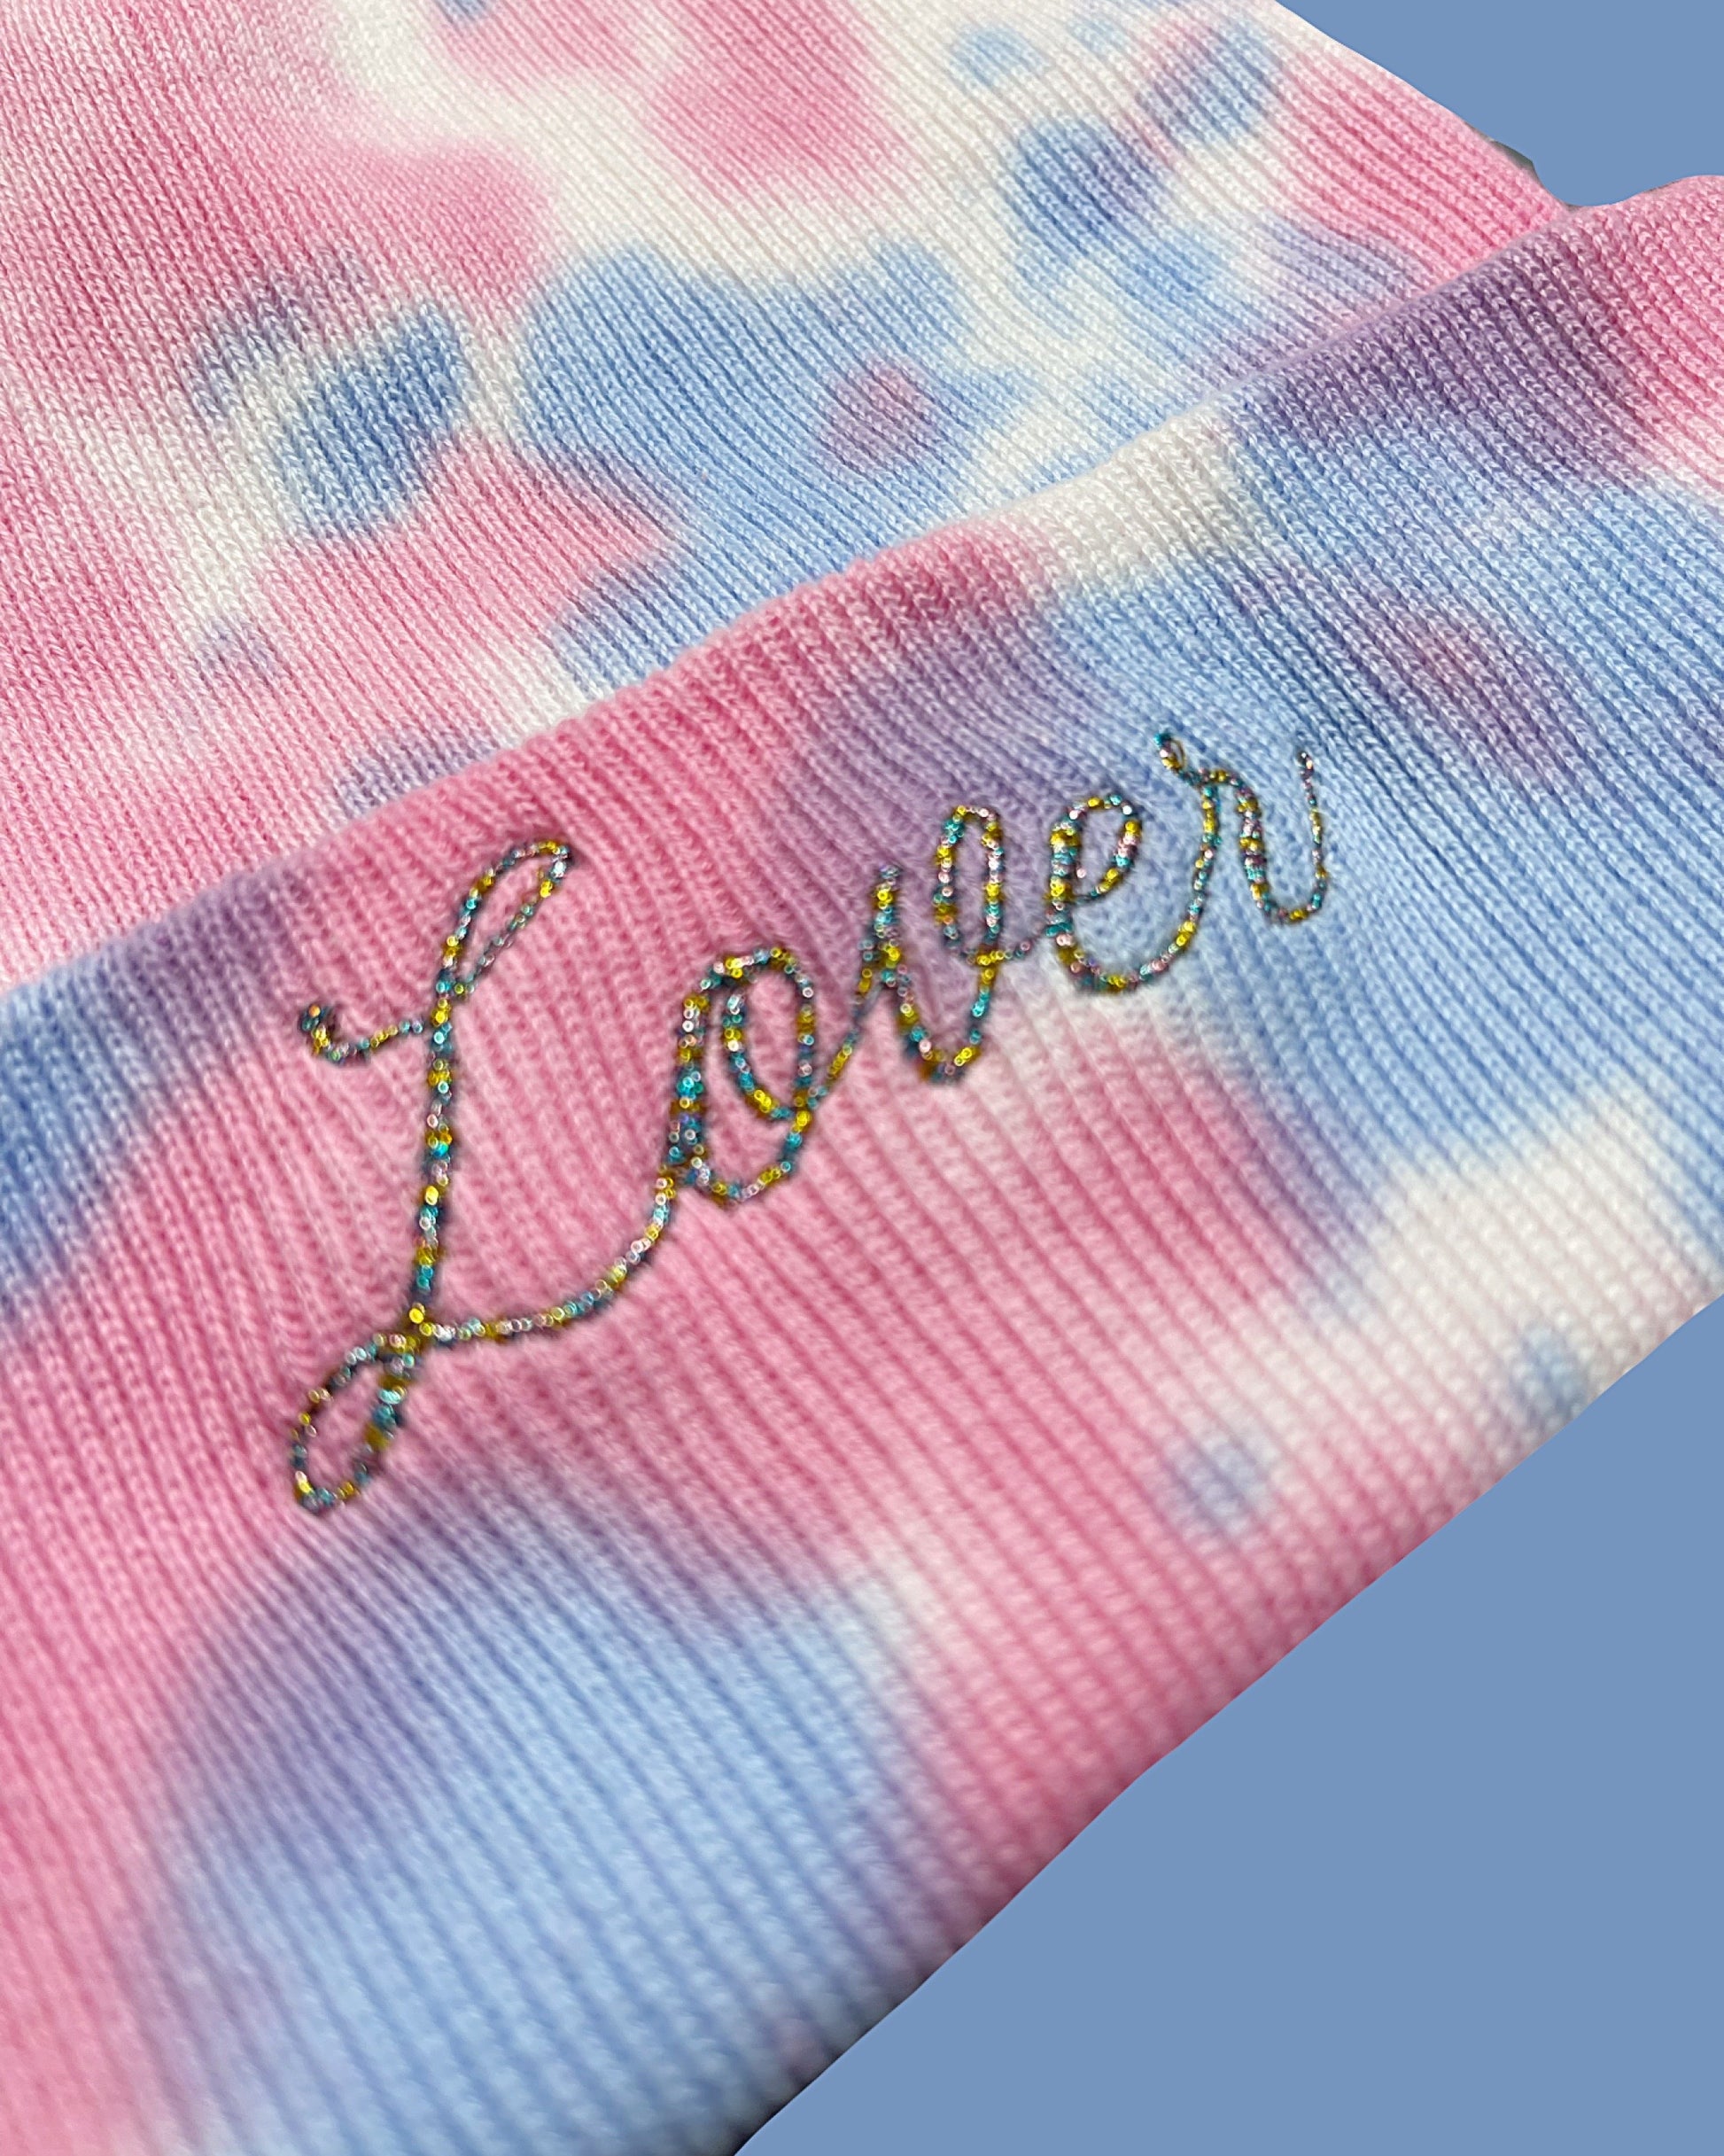 detail view of pink and blue tie dye knit beanie embroidered in variegated metallic thread with "LOVER" like the cover to the Taylor Swift Album of the same name